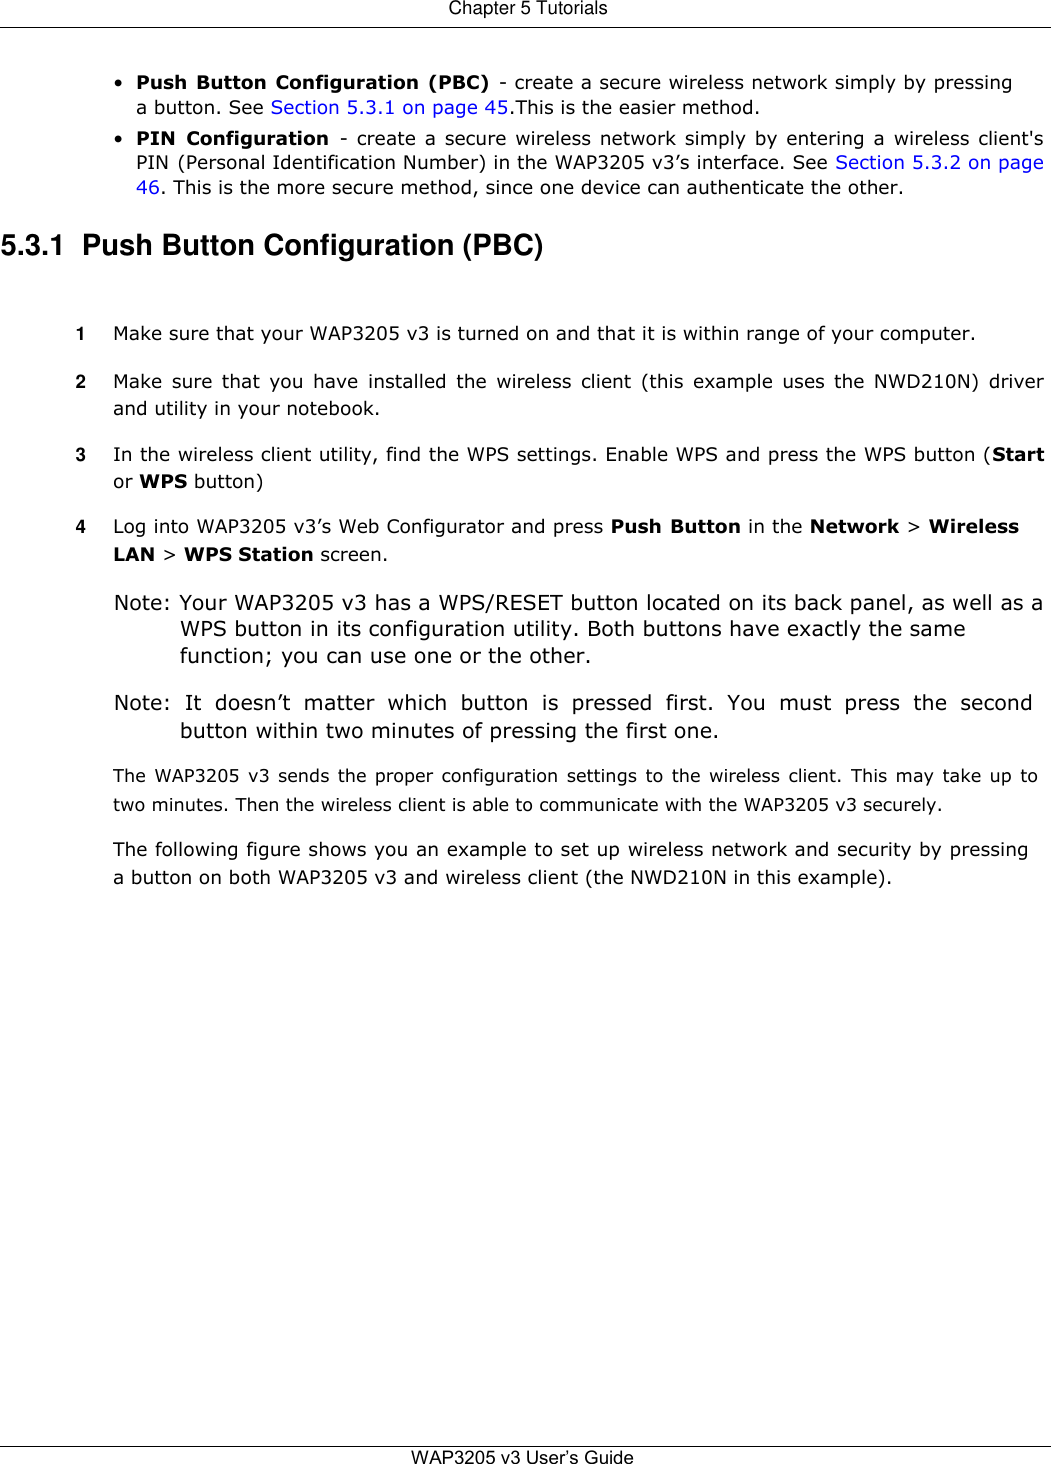 Chapter 5 Tutorials   • Push Button Configuration (PBC)  - create a secure wireless network simply by pressing a button. See Section 5.3.1 on page 45.This is the easier method.  • PIN  Configuration  - create a secure wireless network simply by entering a wireless client&apos;s PIN (Personal Identification Number) in the WAP3205 v3’s interface. See Section 5.3.2 on page 46. This is the more secure method, since one device can authenticate the other.  5.3.1  Push Button Configuration (PBC)   1  Make sure that your WAP3205 v3 is turned on and that it is within range of your computer.  2  Make sure that you have  installed the wireless  client  (this example  uses the  NWD210N)  driver and utility in your notebook.  3  In the wireless client utility, find the WPS settings. Enable WPS and press the WPS button (Start or WPS button)  4  Log into WAP3205 v3’s Web Configurator and press Push Button in the Network &gt; Wireless LAN &gt; WPS Station screen.  Note: Your WAP3205 v3 has a WPS/RESET button located on its back panel, as well as a WPS button in its configuration utility. Both buttons have exactly the same function; you can use one or the other.  Note:  It  doesn’t  matter  which  button  is  pressed  first.  You  must  press  the  second button within two minutes of pressing the first one.  The WAP3205 v3 sends the proper configuration settings to the wireless client. This may take up to two minutes. Then the wireless client is able to communicate with the WAP3205 v3 securely.  The following figure shows you an example to set up wireless network and security by pressing a button on both WAP3205 v3 and wireless client (the NWD210N in this example).                           WAP3205 v3 User’s Guide   